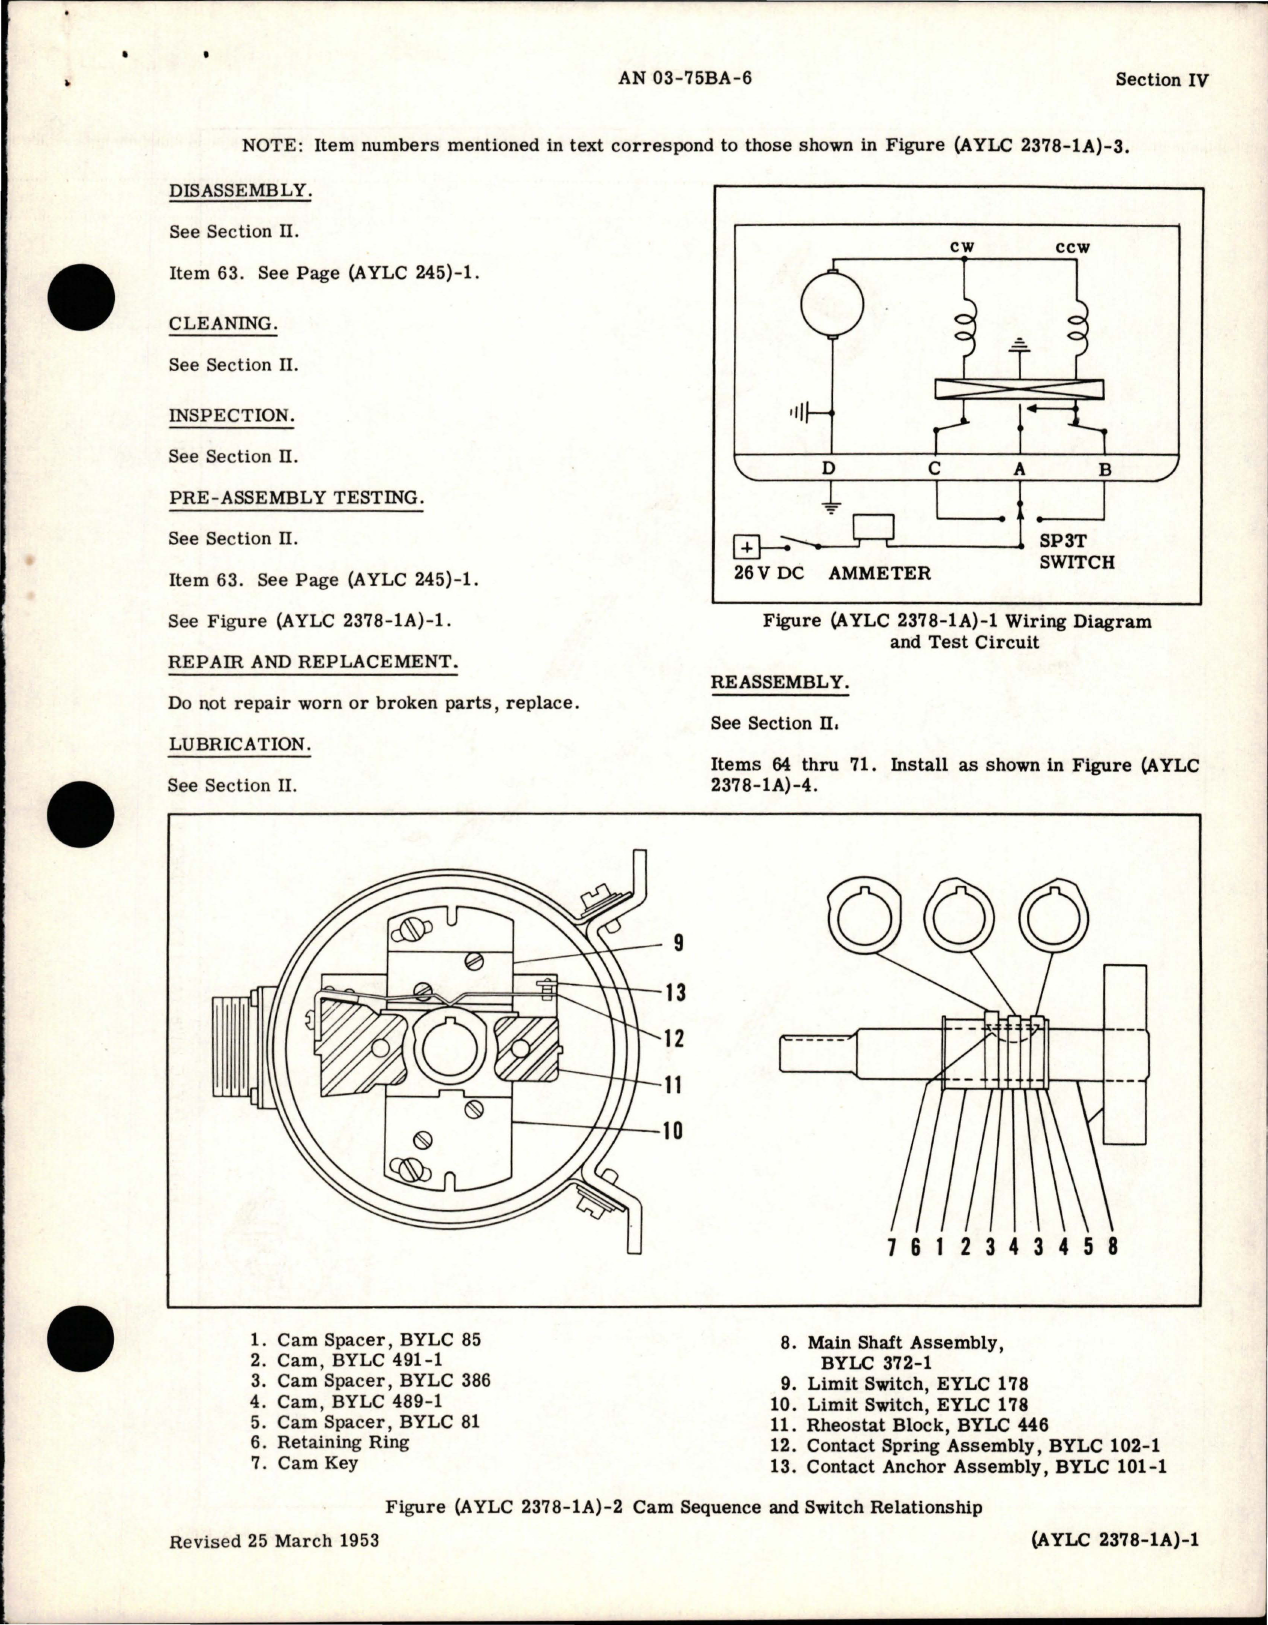 Sample page 5 from AirCorps Library document: Overhaul Instructions for Aircraft Actuators - Model AYLC Series 